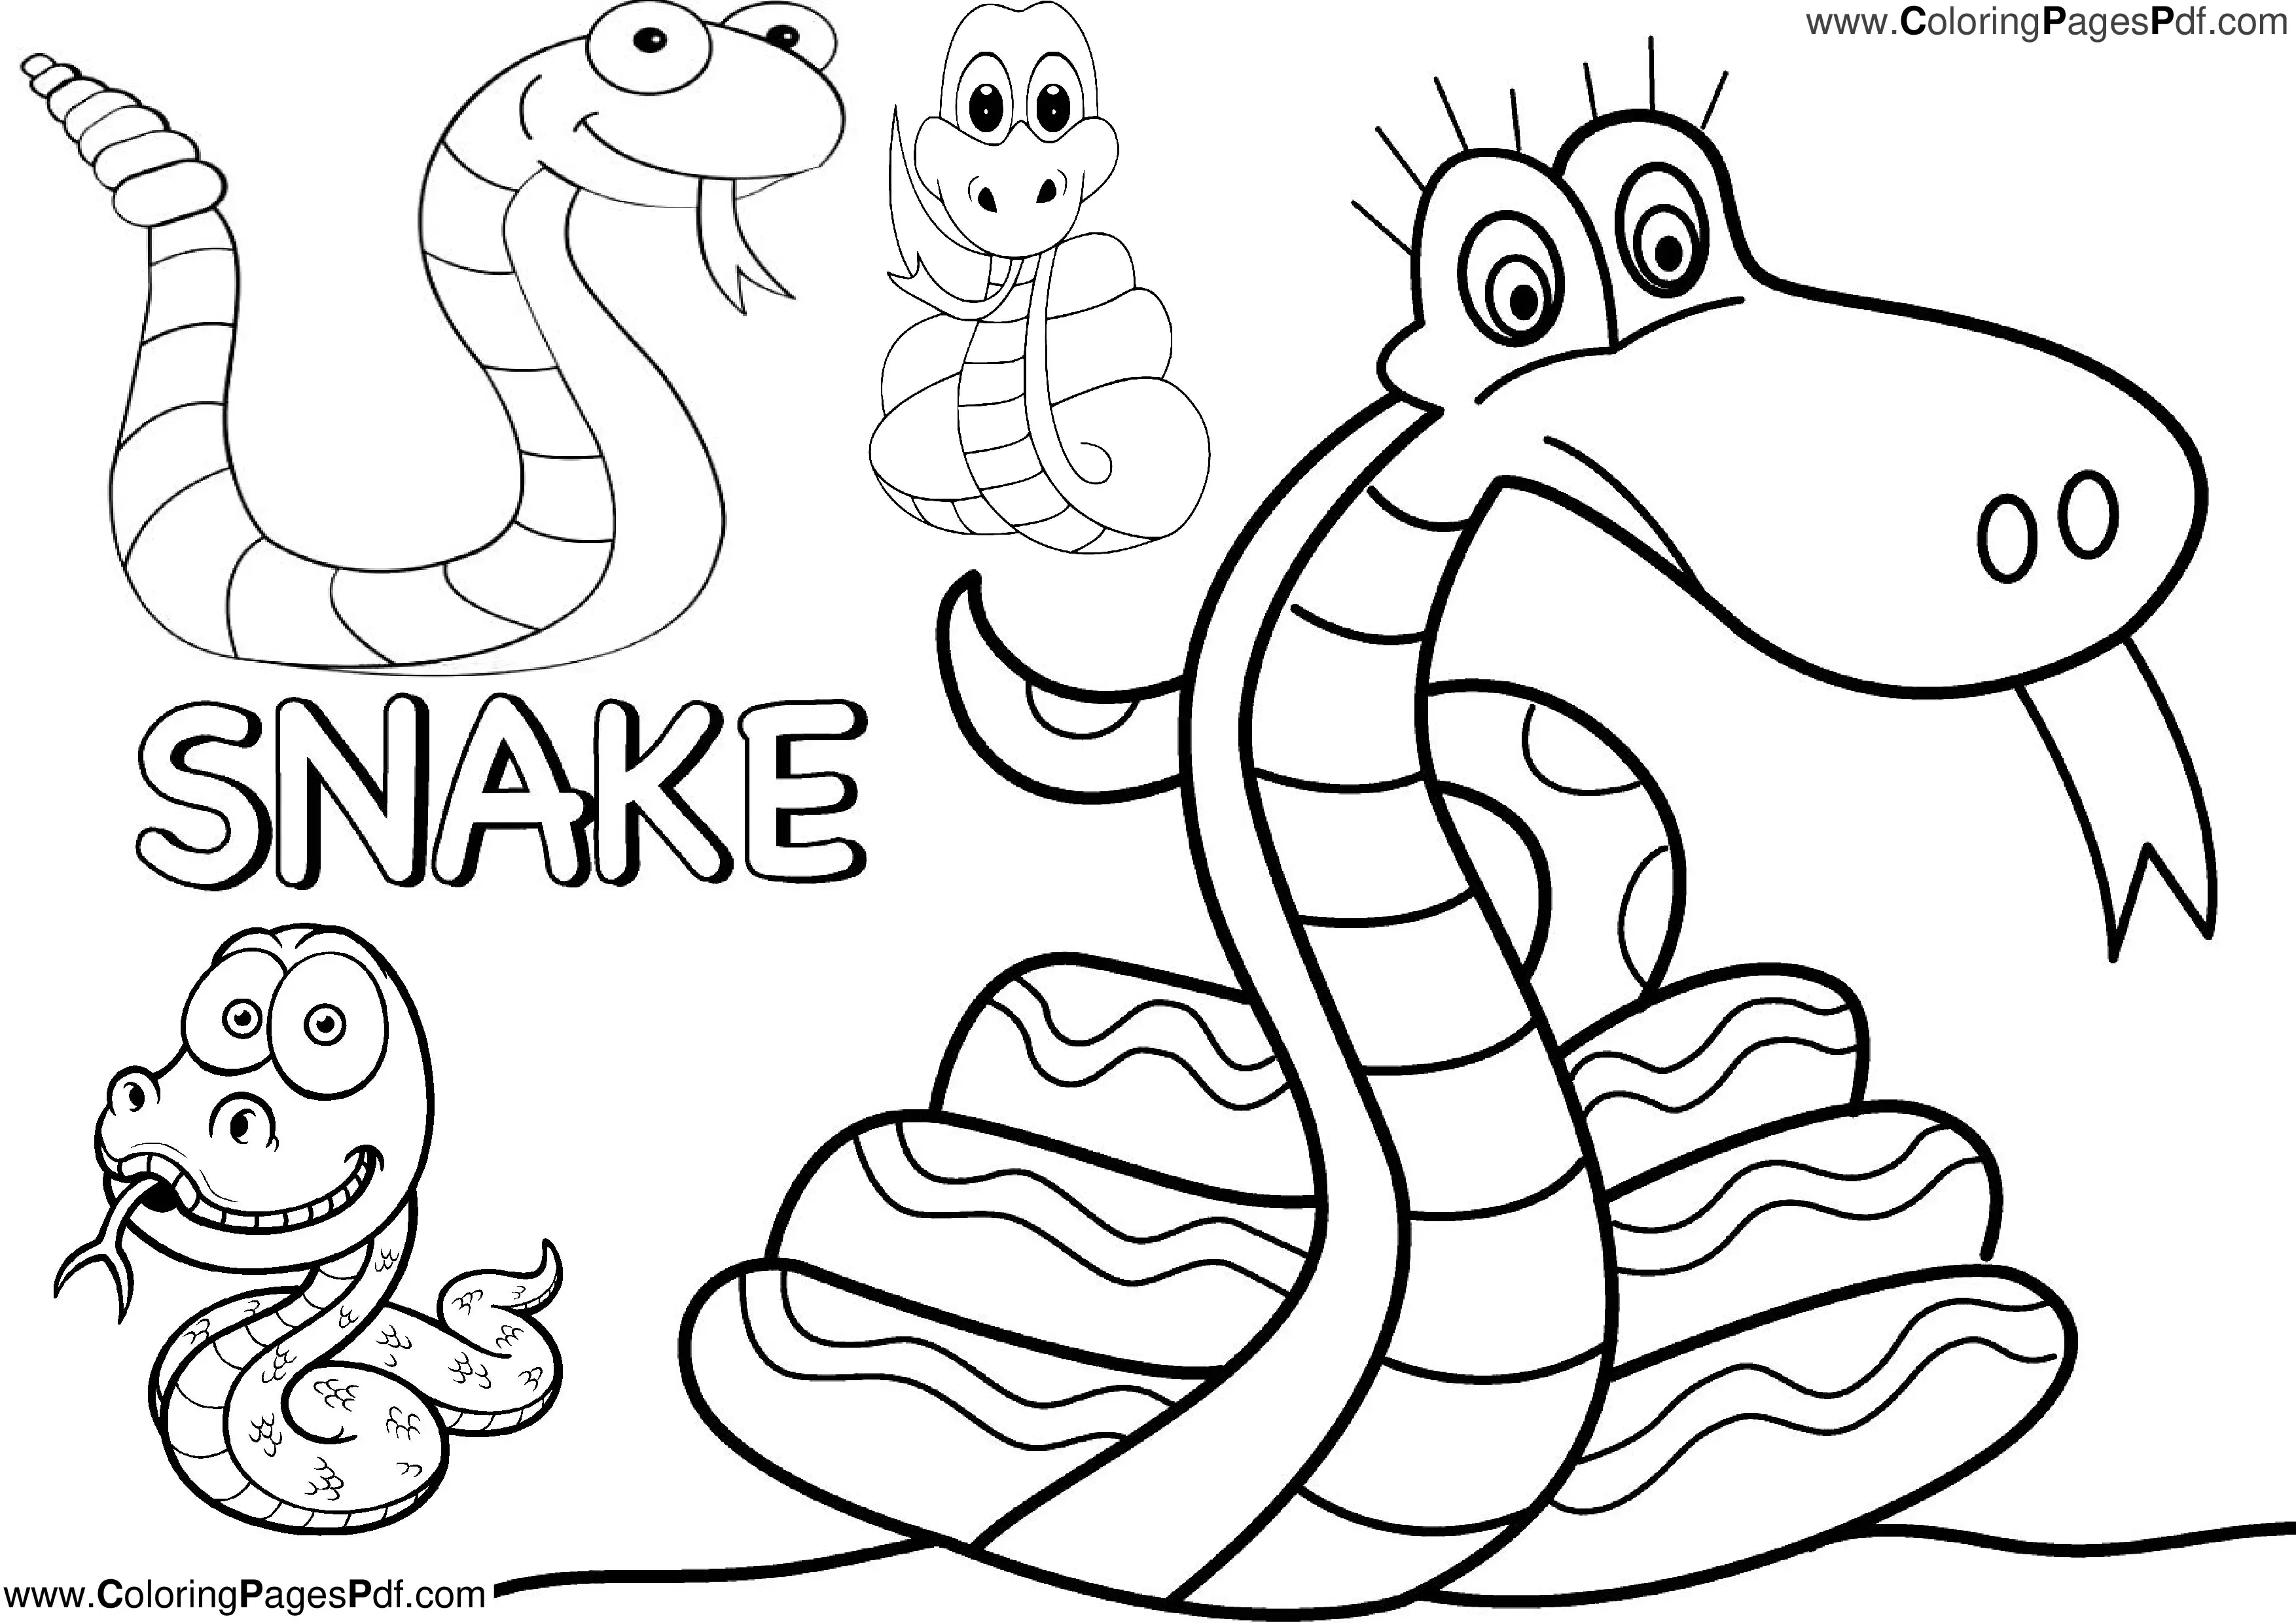 Snake colouring pages for kids